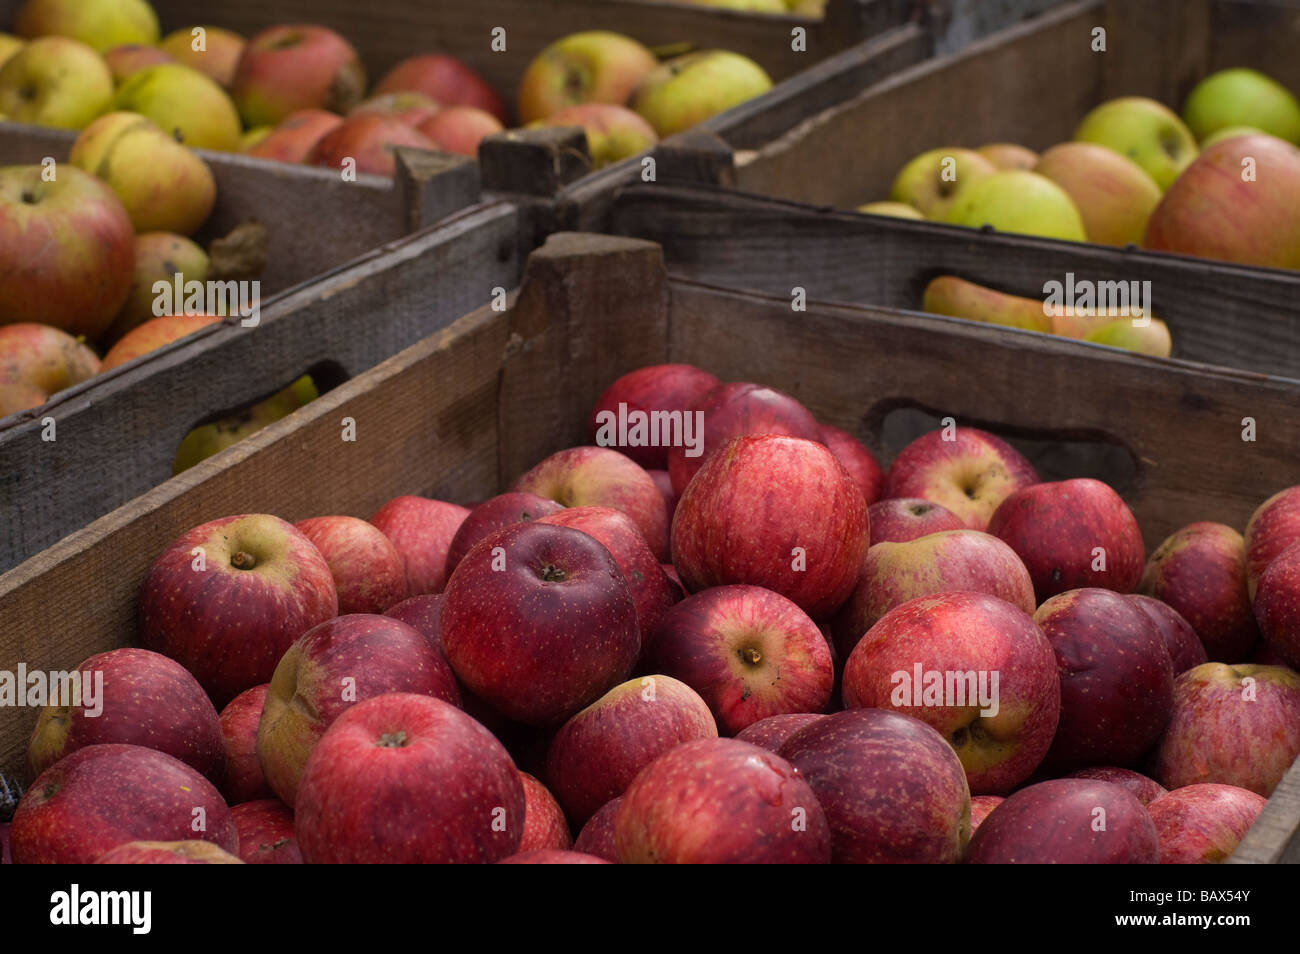 Harvested cider apples in wooden crates Somerset England Stock Photo